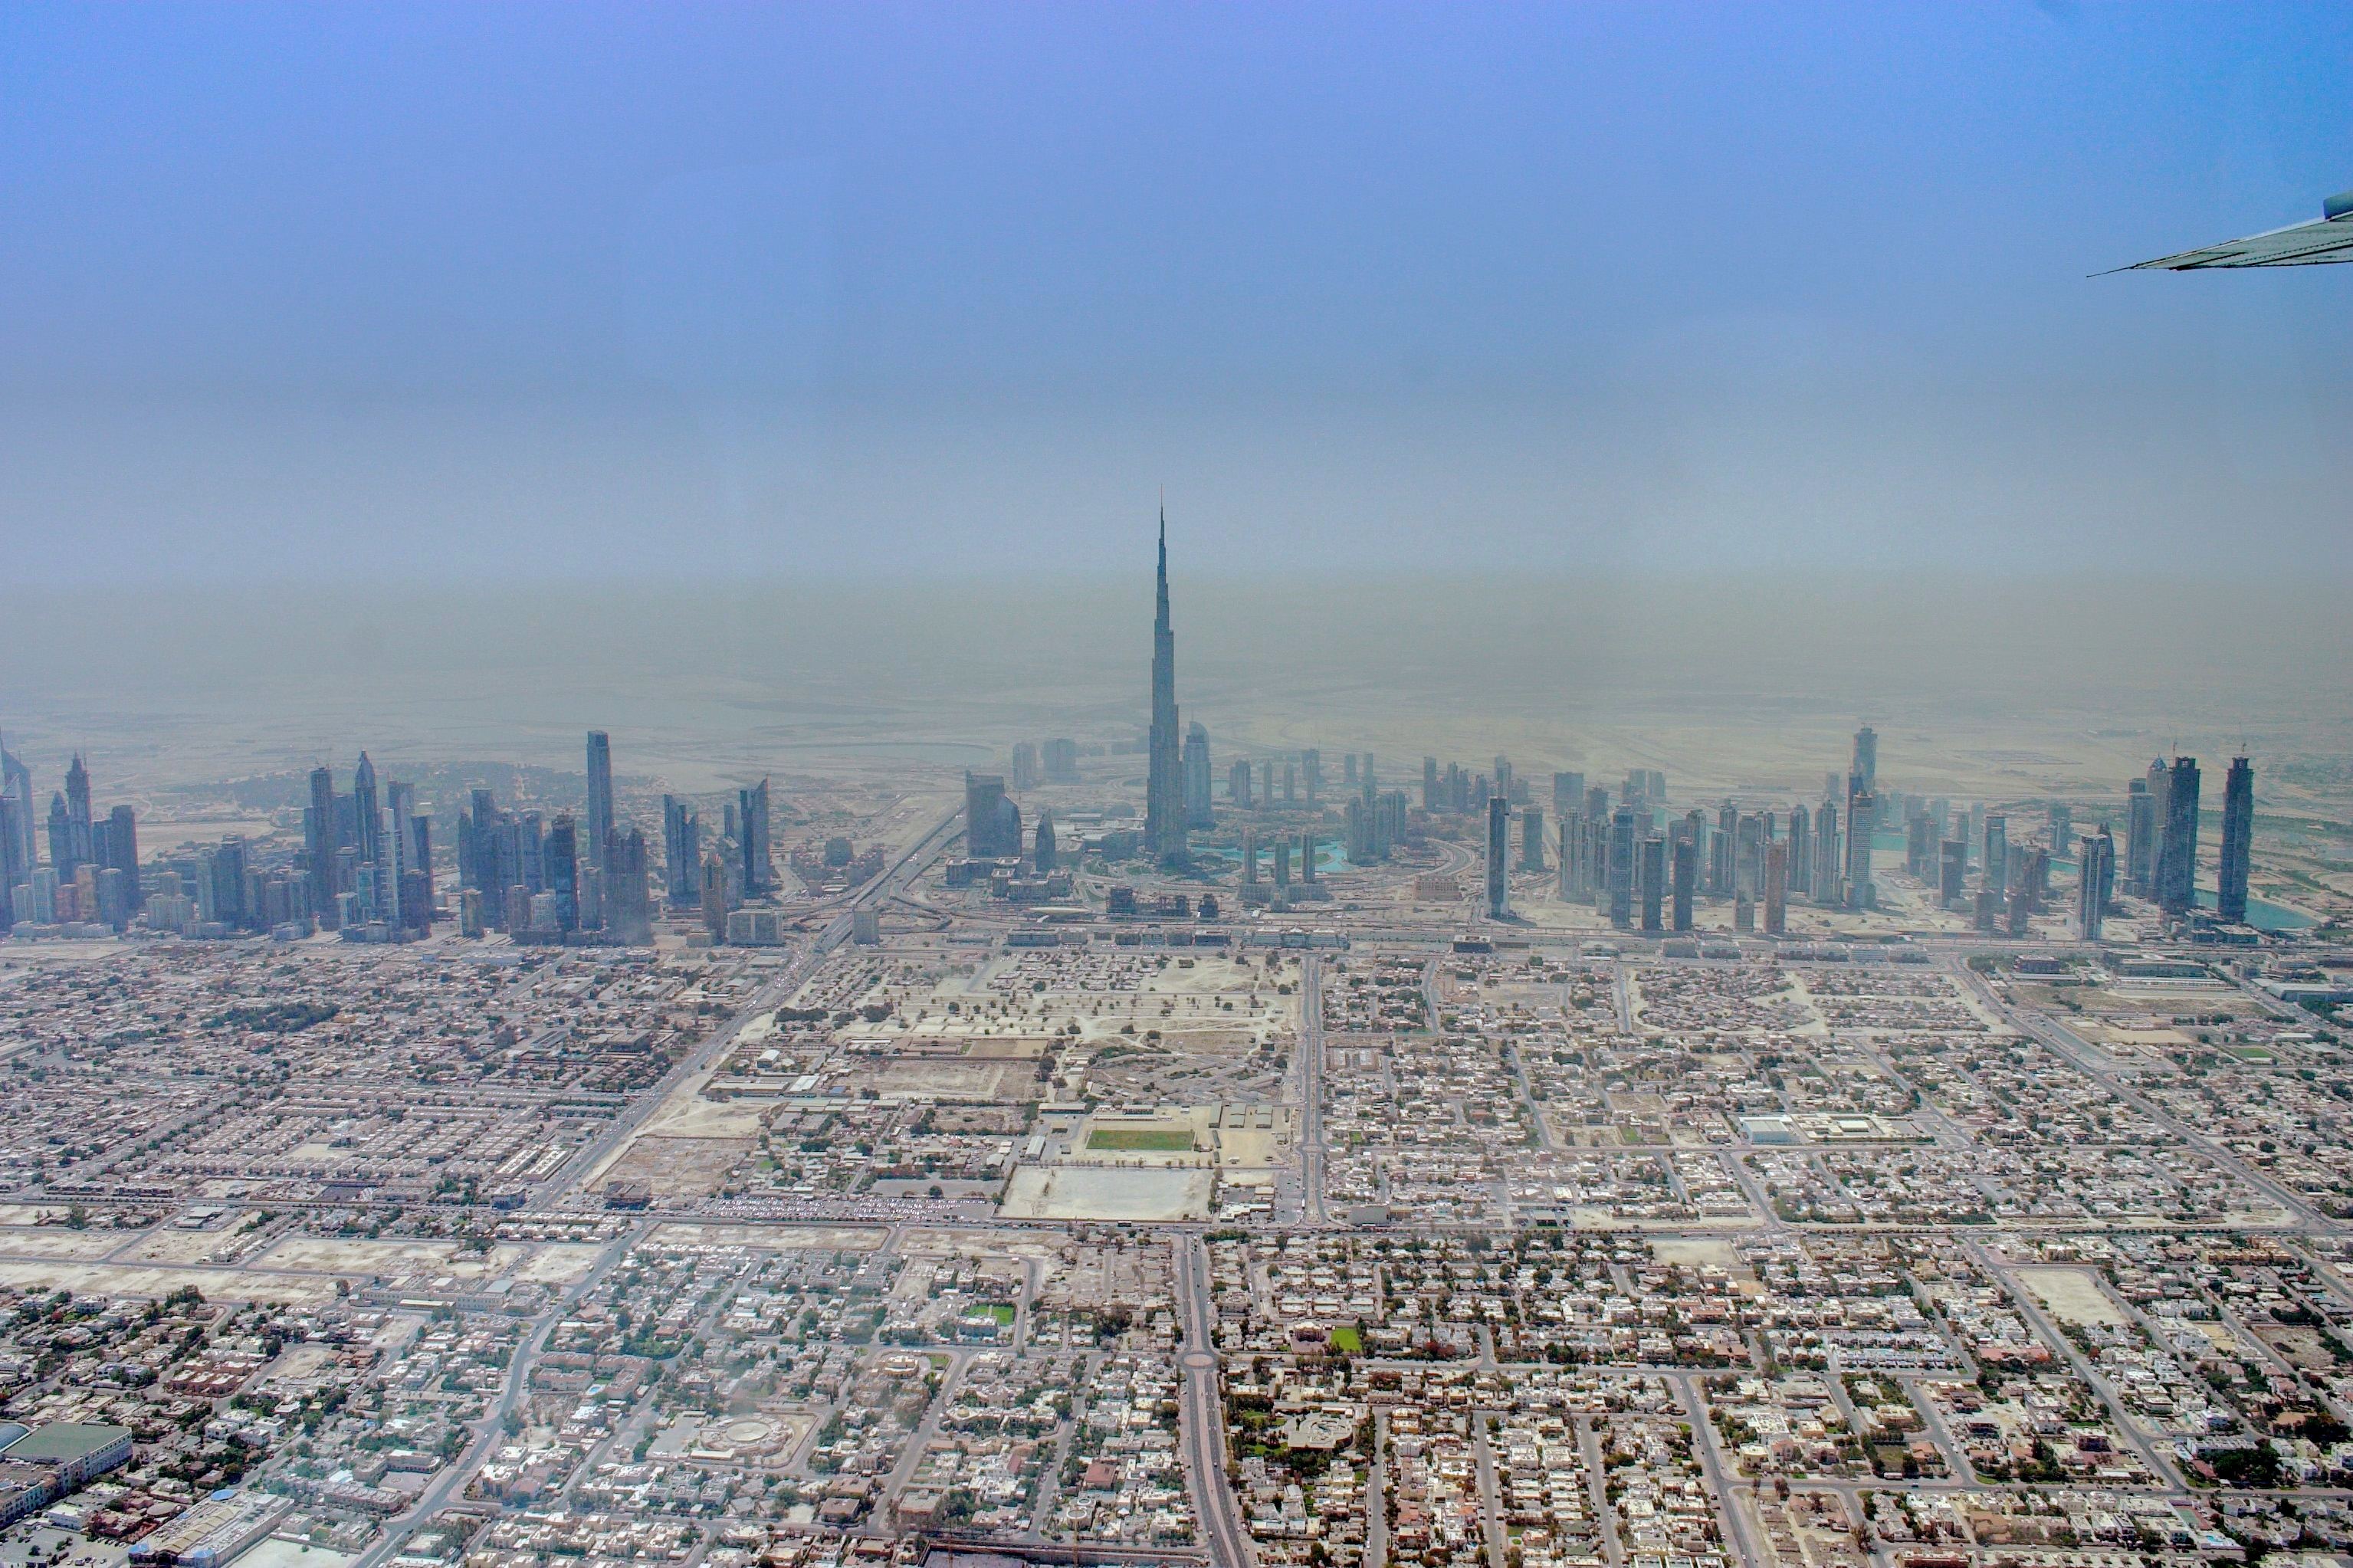 19 across jumeirah and al wasl to business bay area from 2500ft